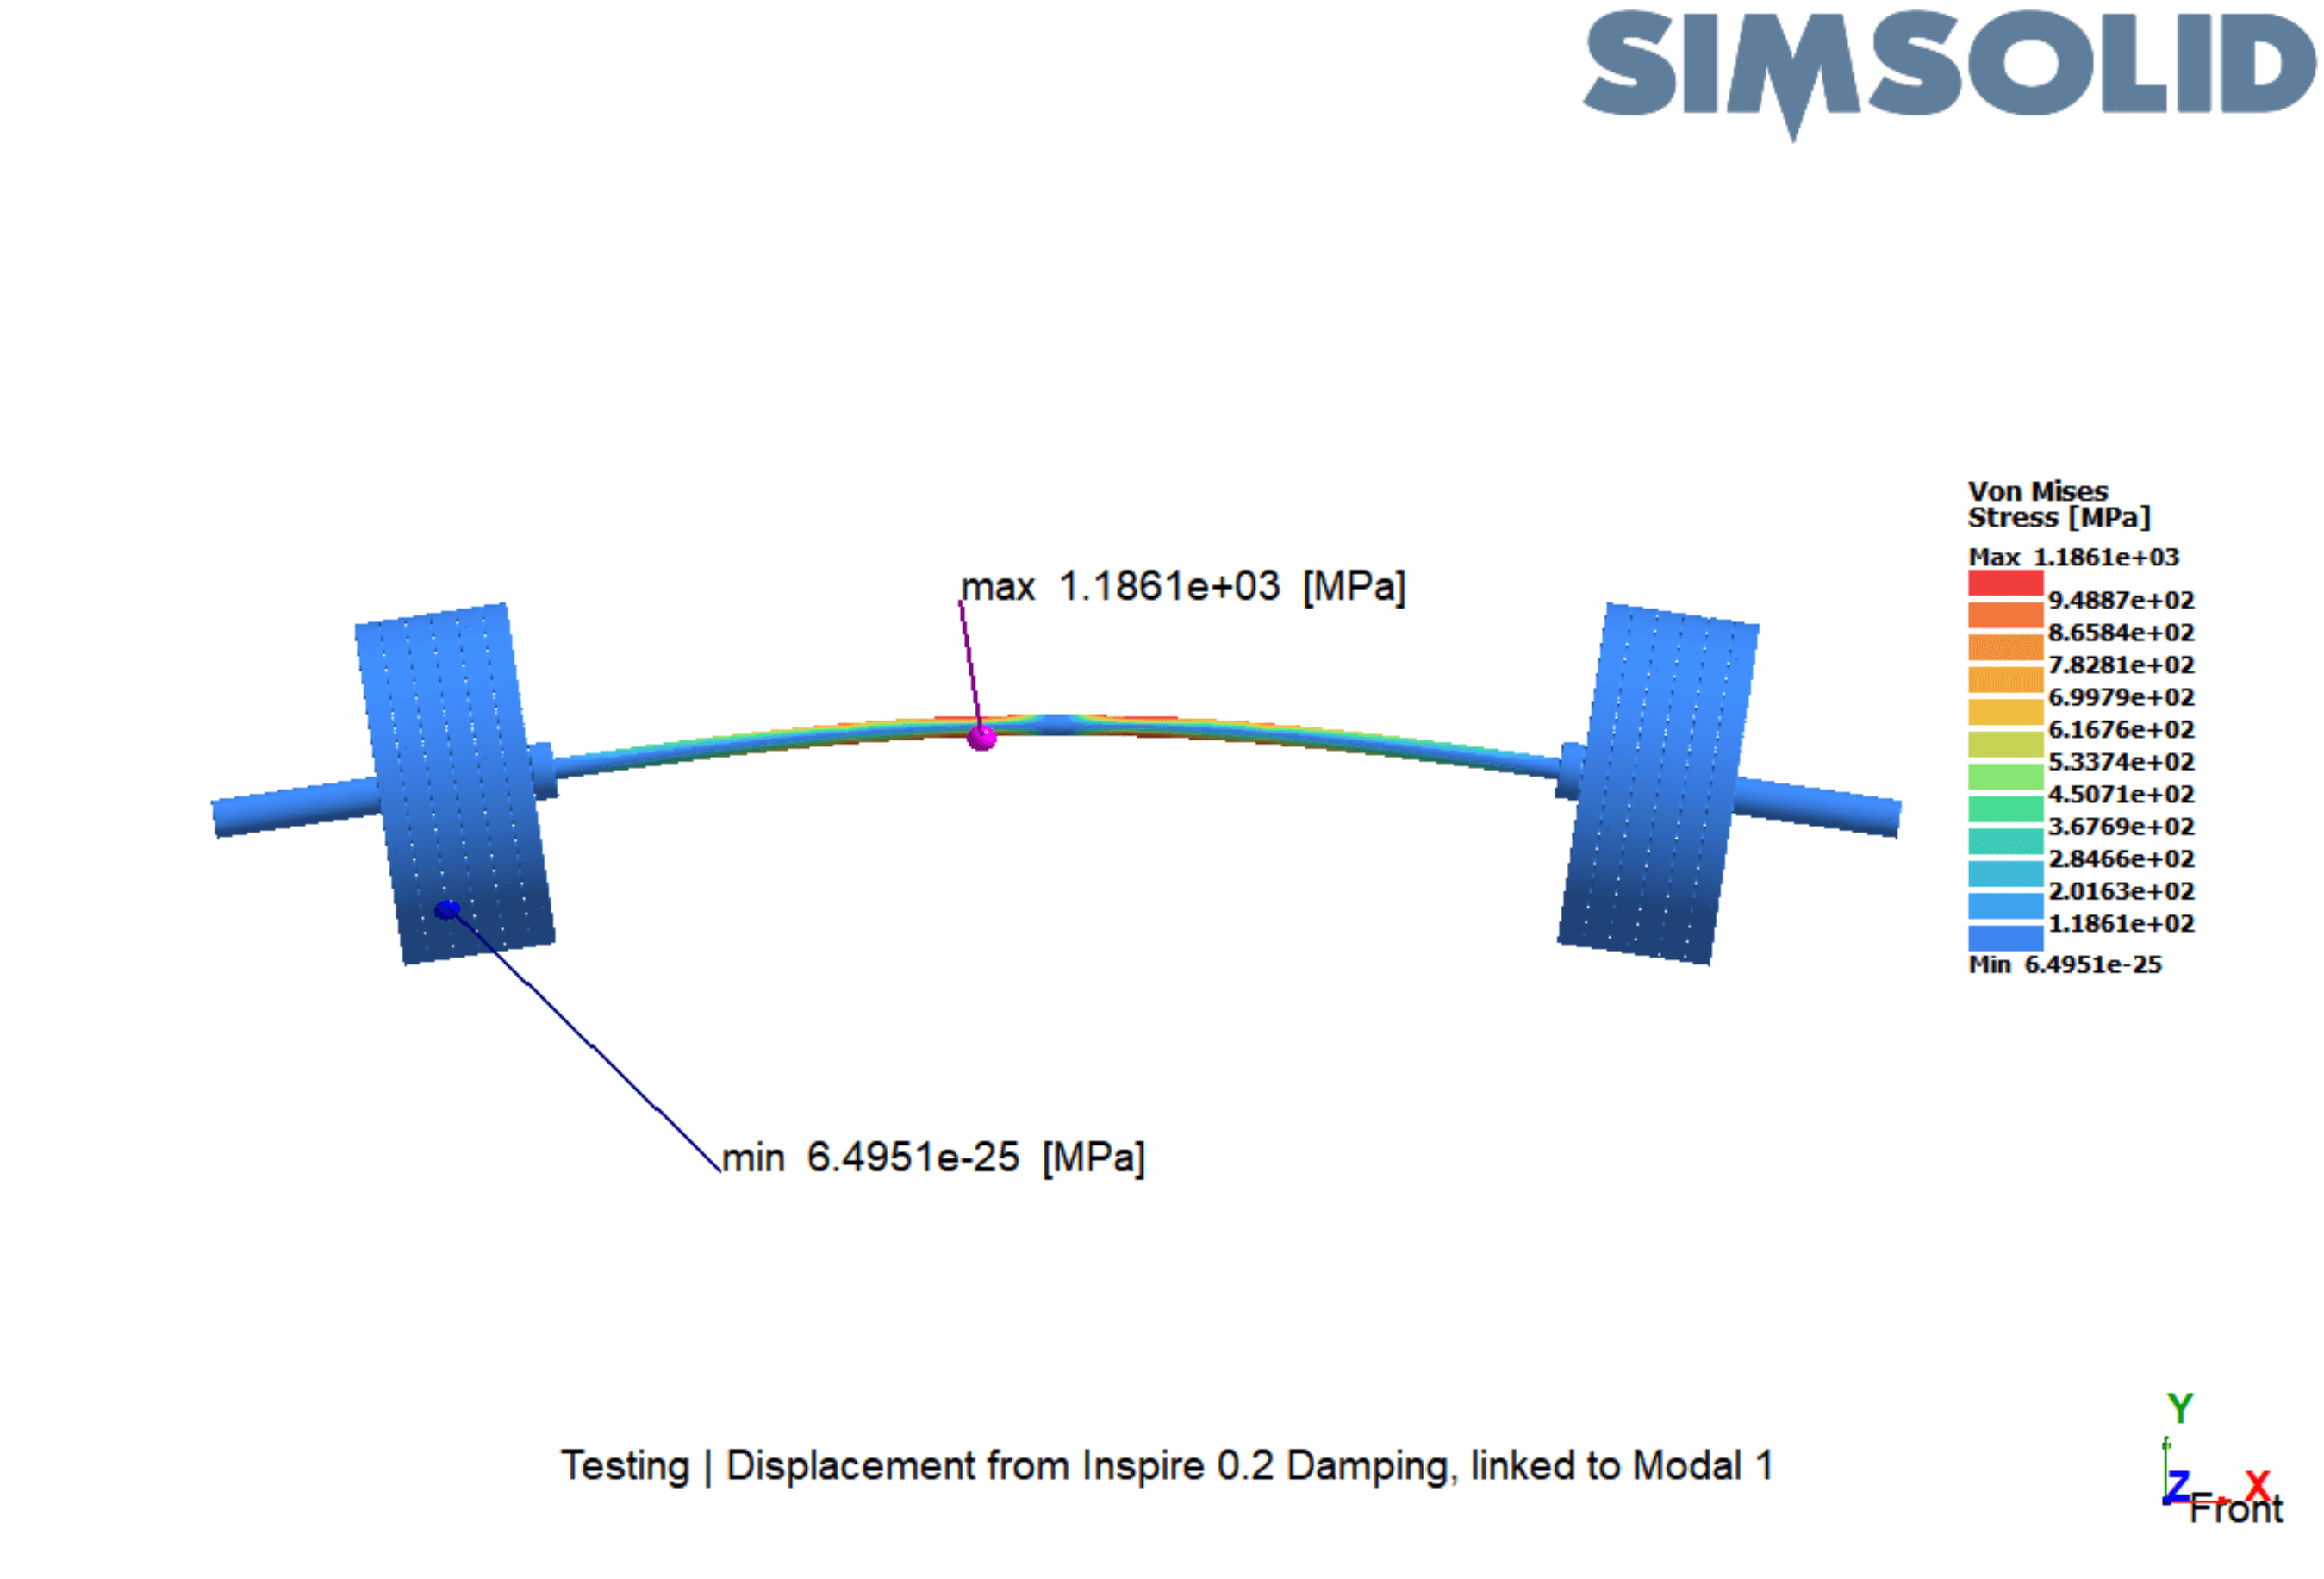 Stress concentration results from SimSolid